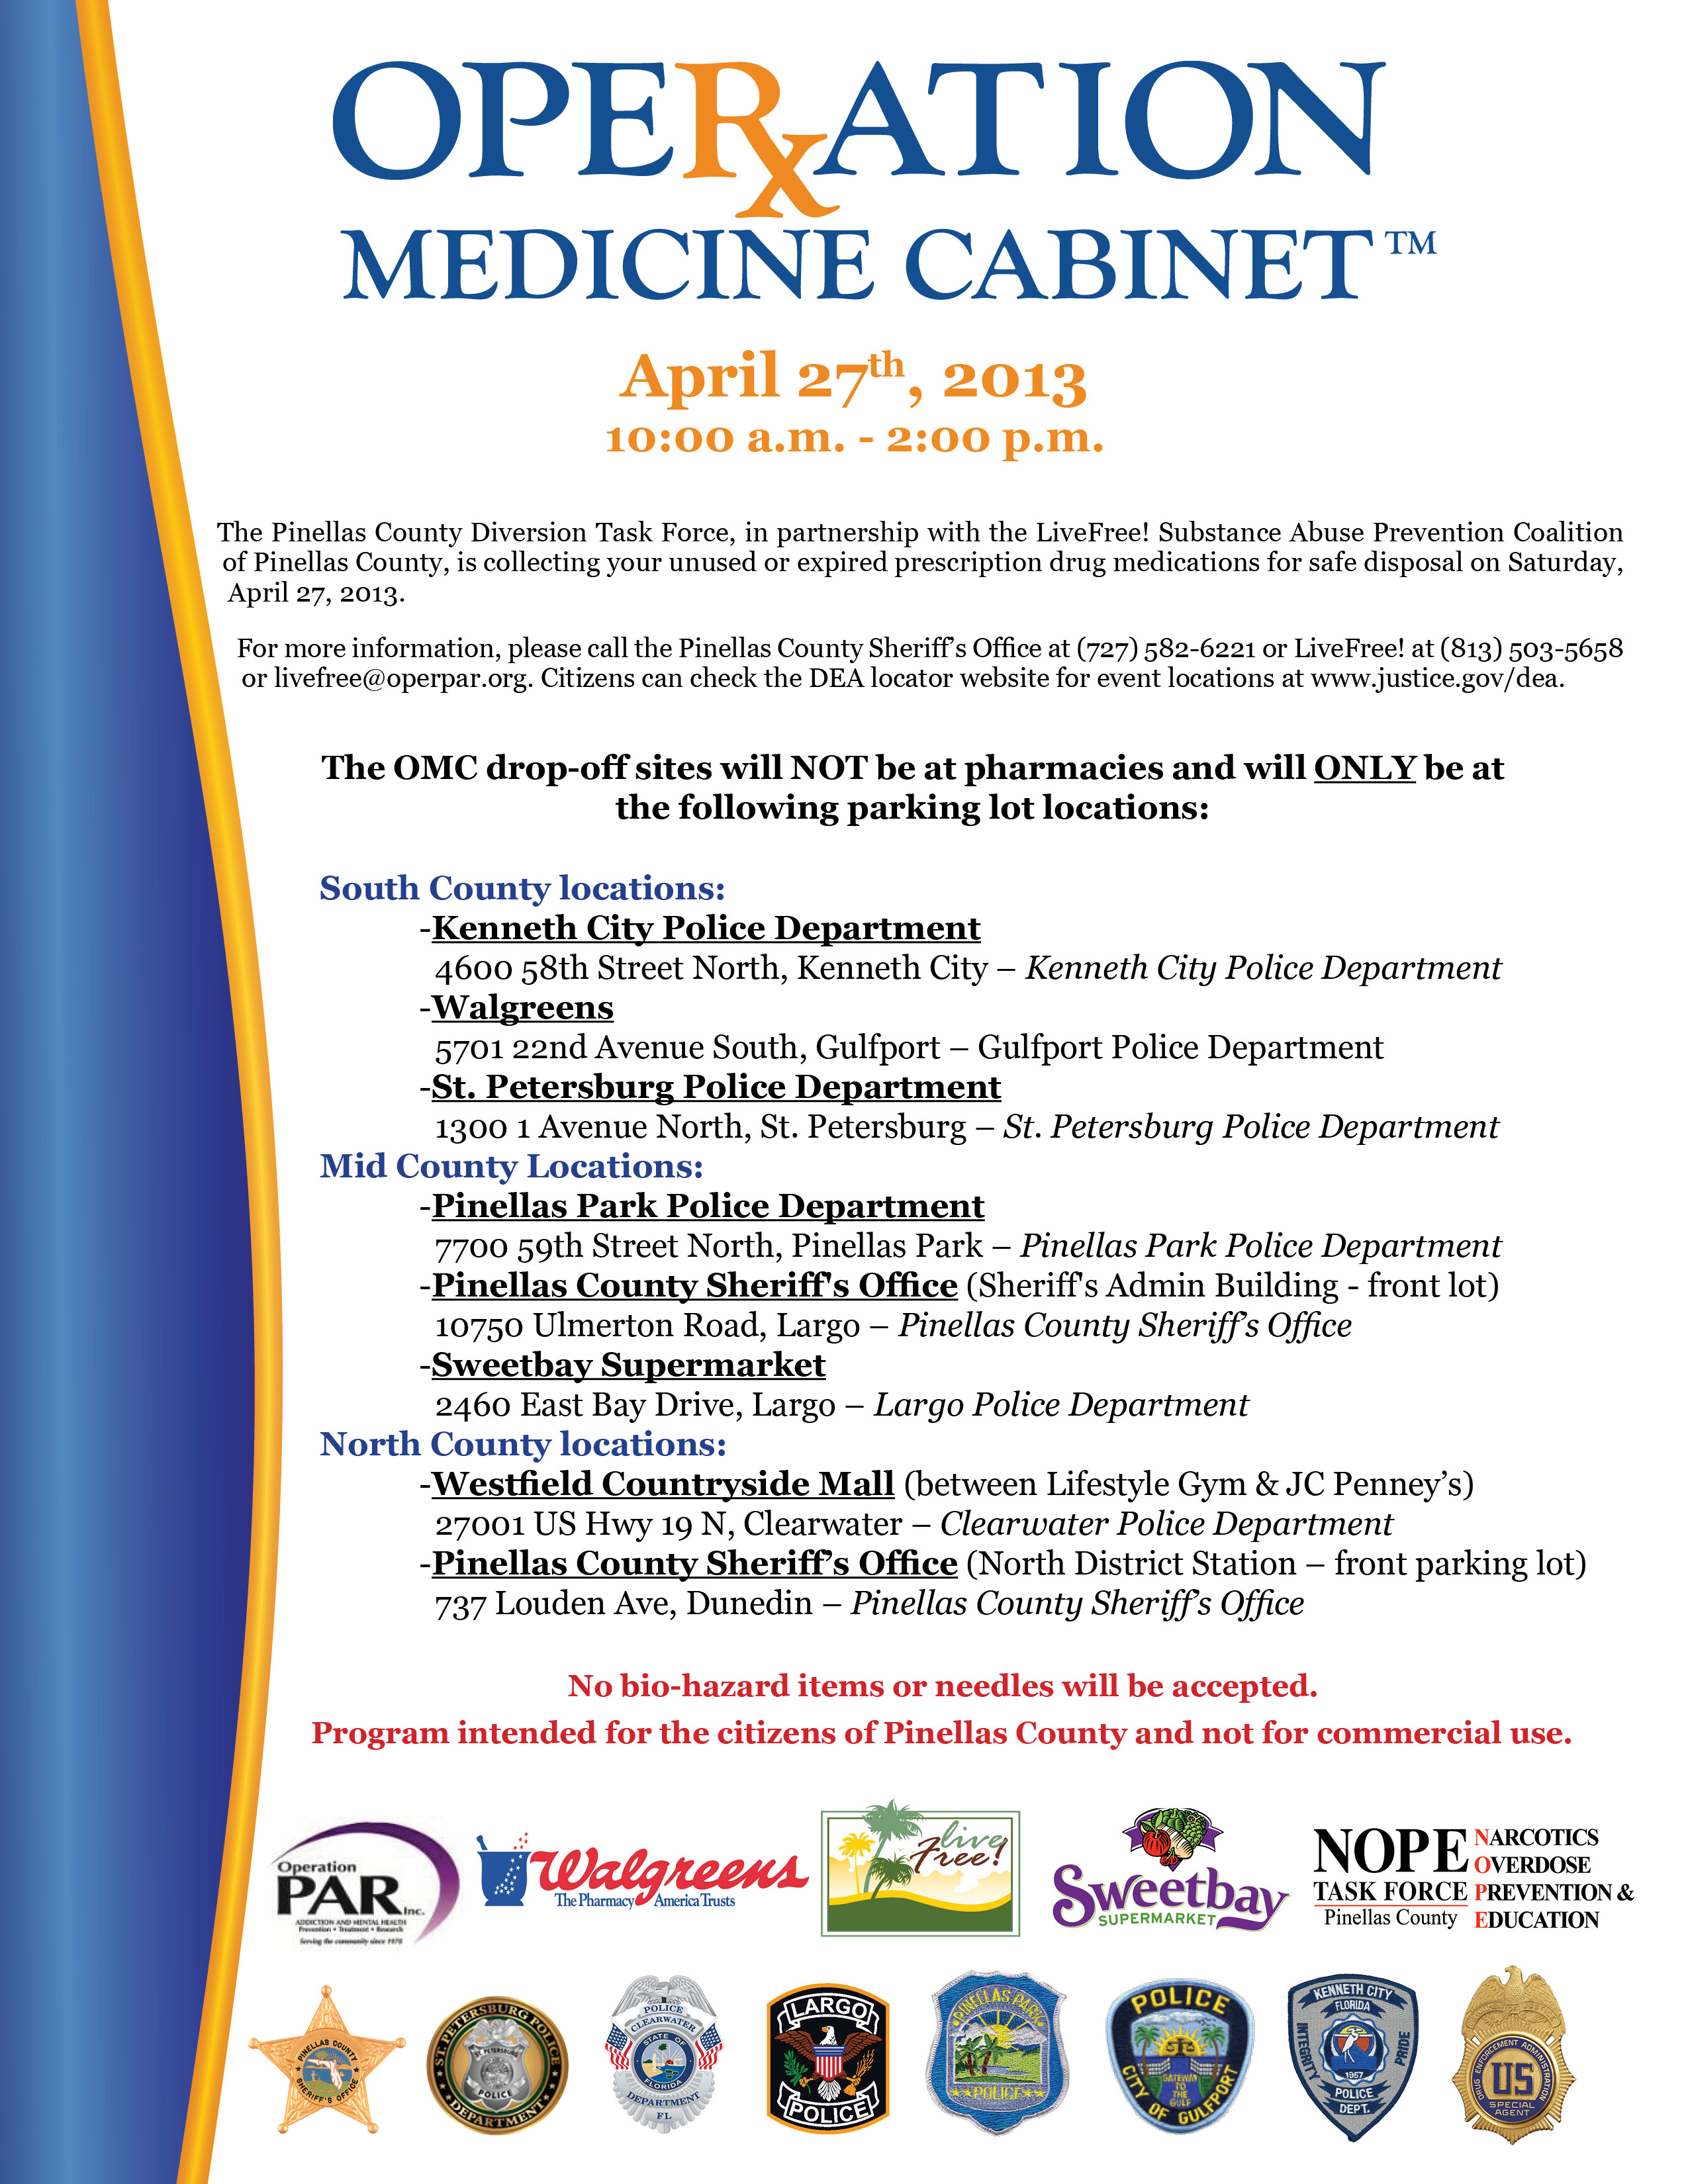 Livefree Supports Operation Medicine Cabinet On April 27th